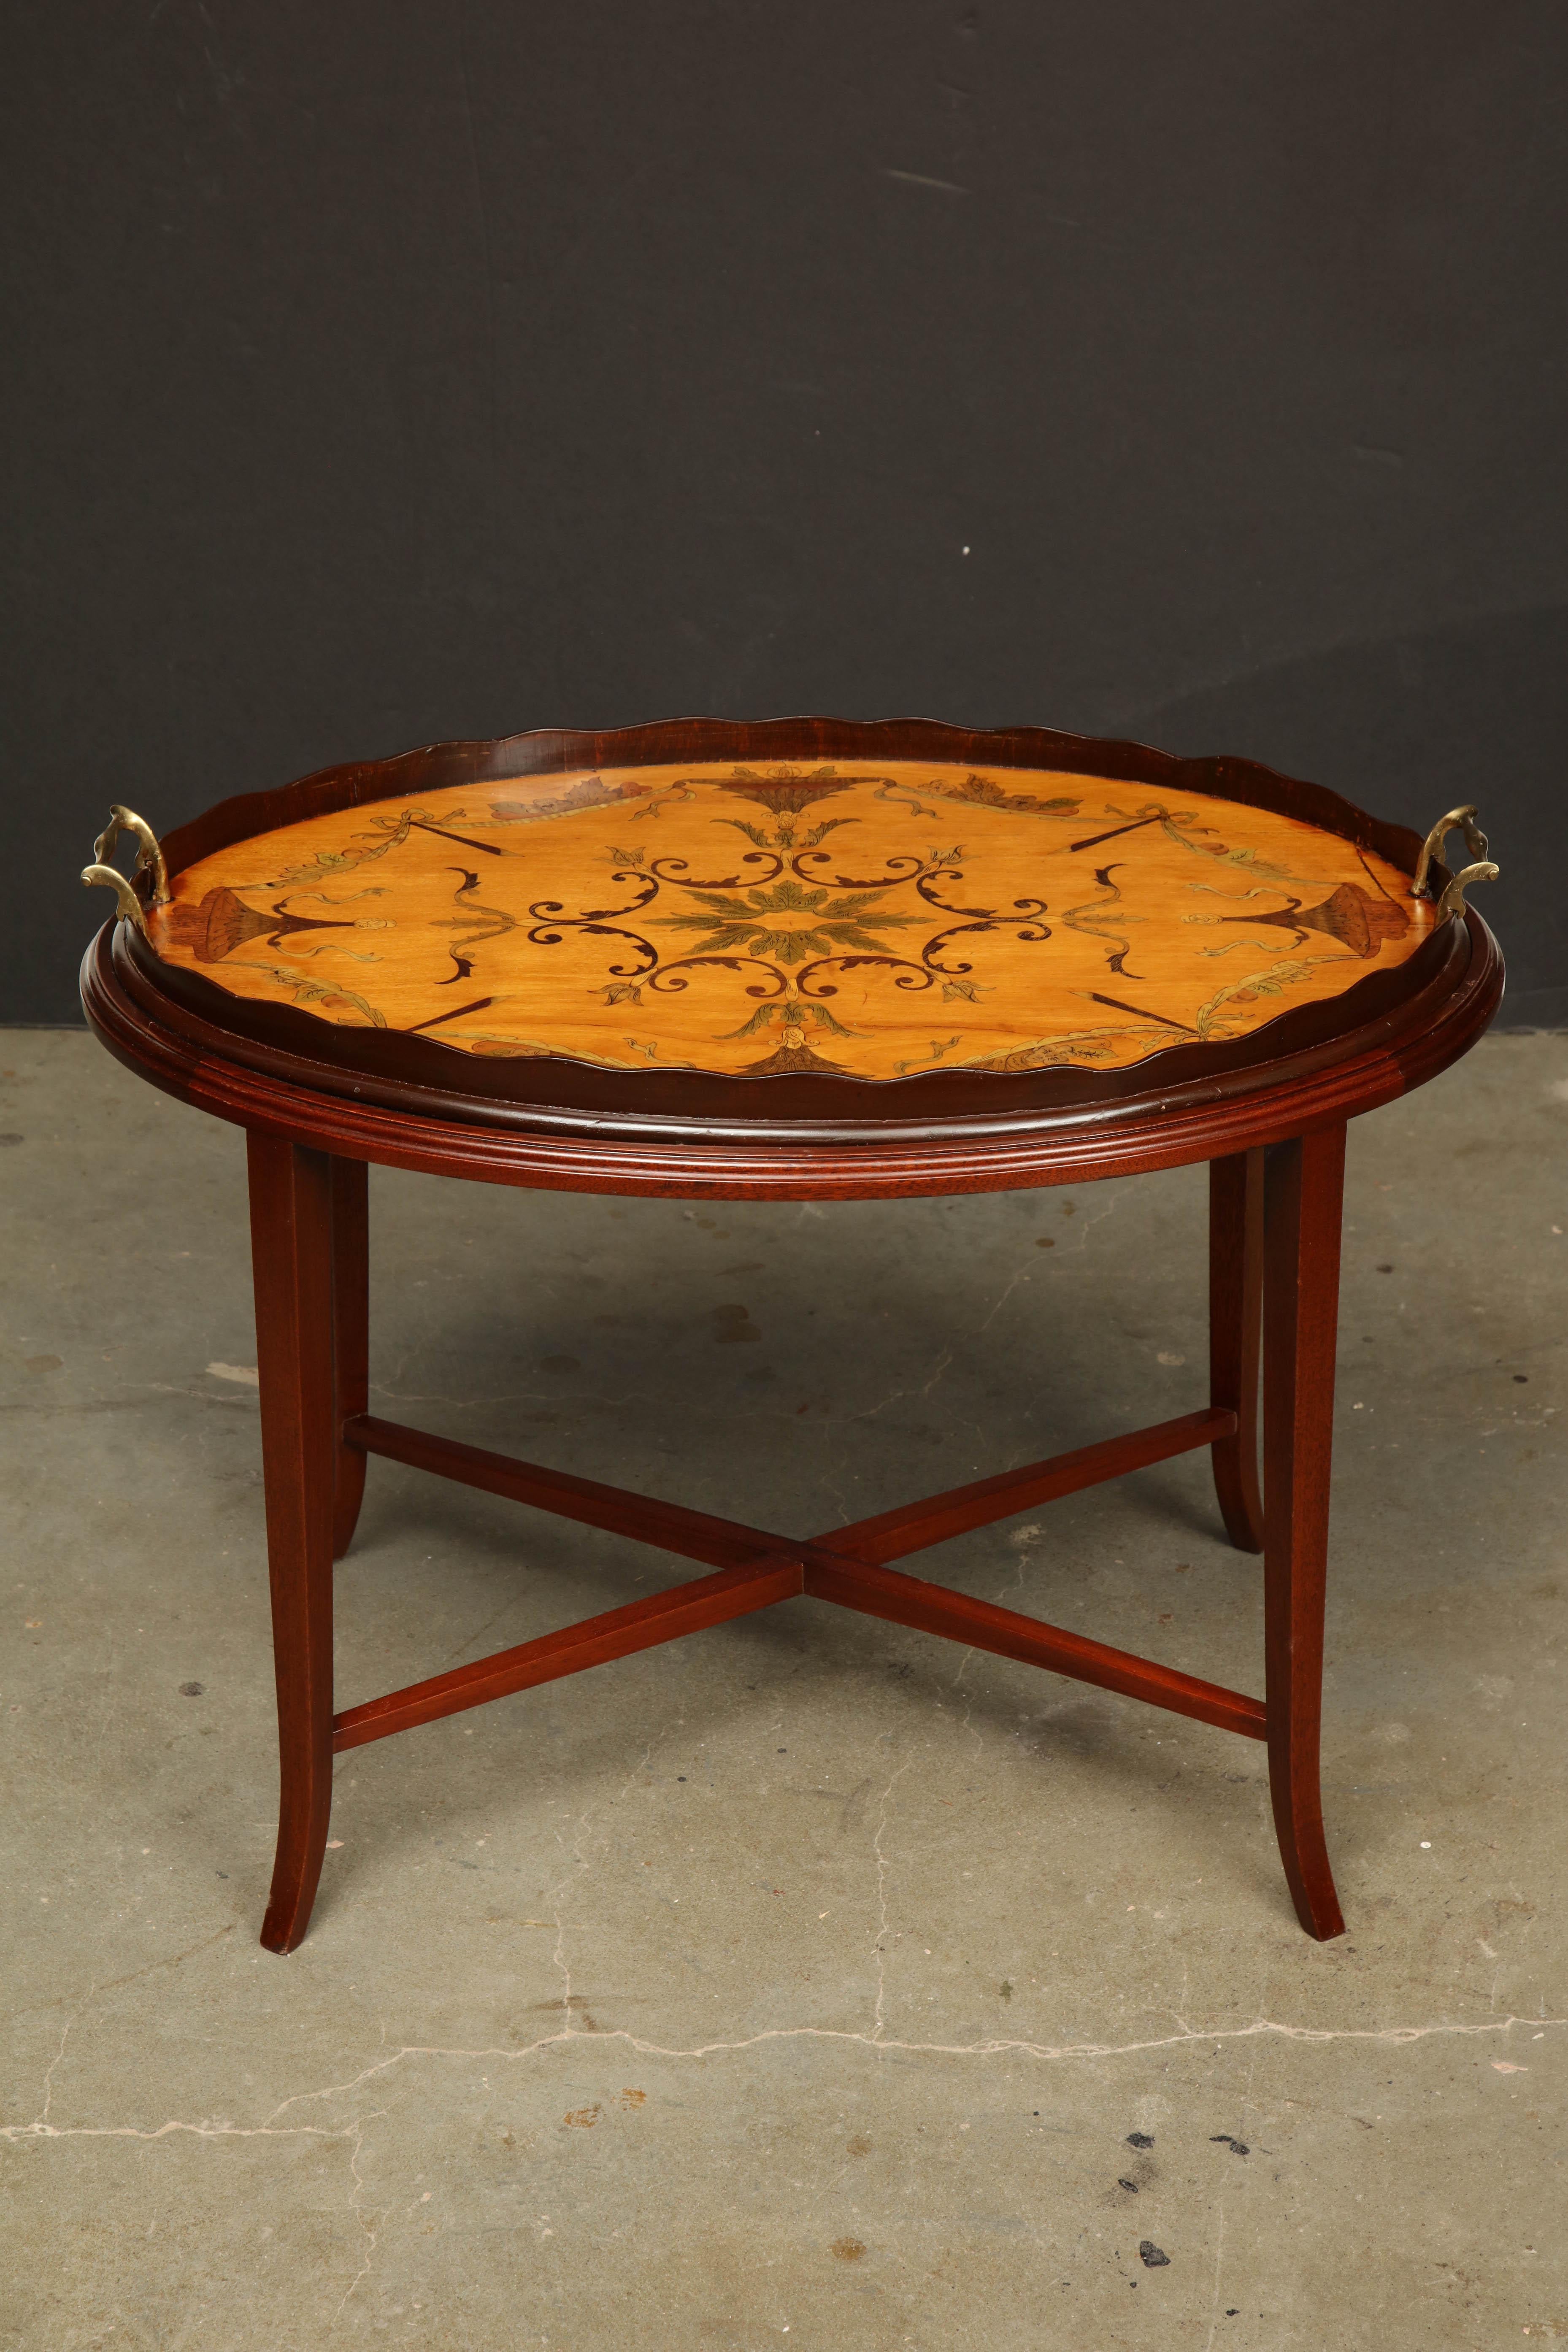 A fine English satinwood tray with elaborate marquetry neoclassic decoration, scalloped wooden gallery and brass handles. On a later X-stretcher base stand.